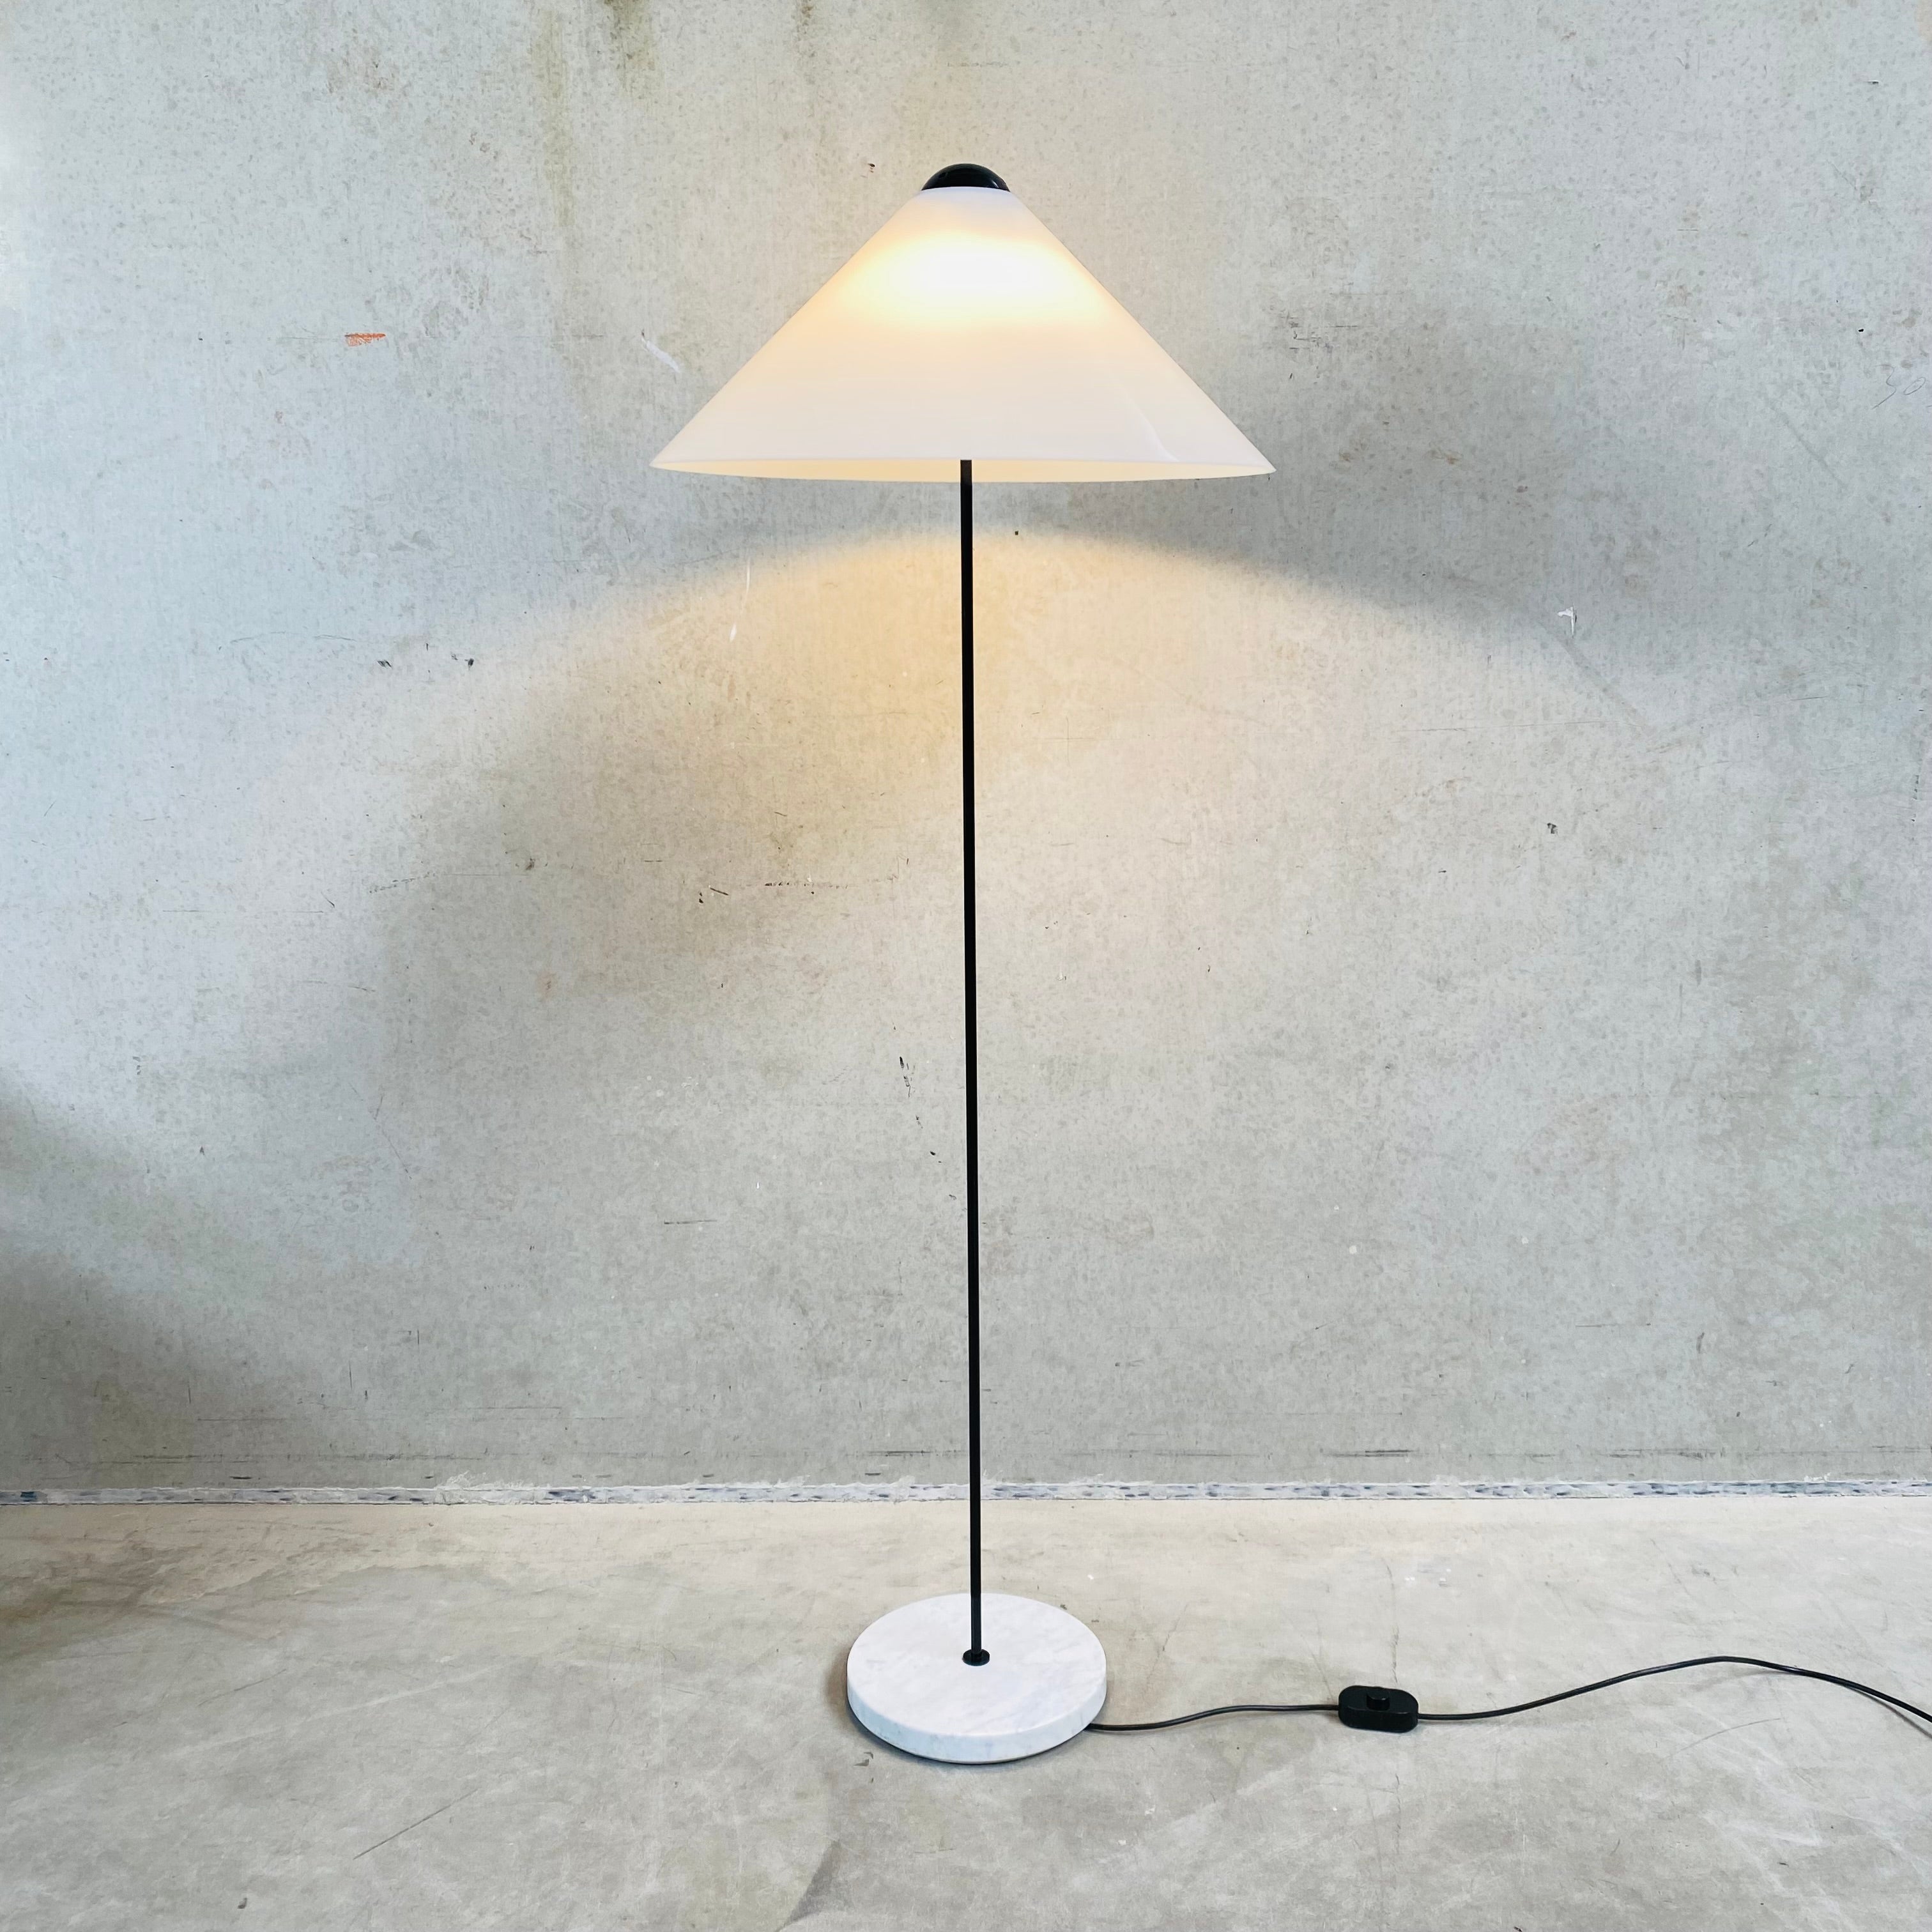 Mid-Century Floor Lamp "Snow" by Vico Magistretti for Oluce Italy 1970